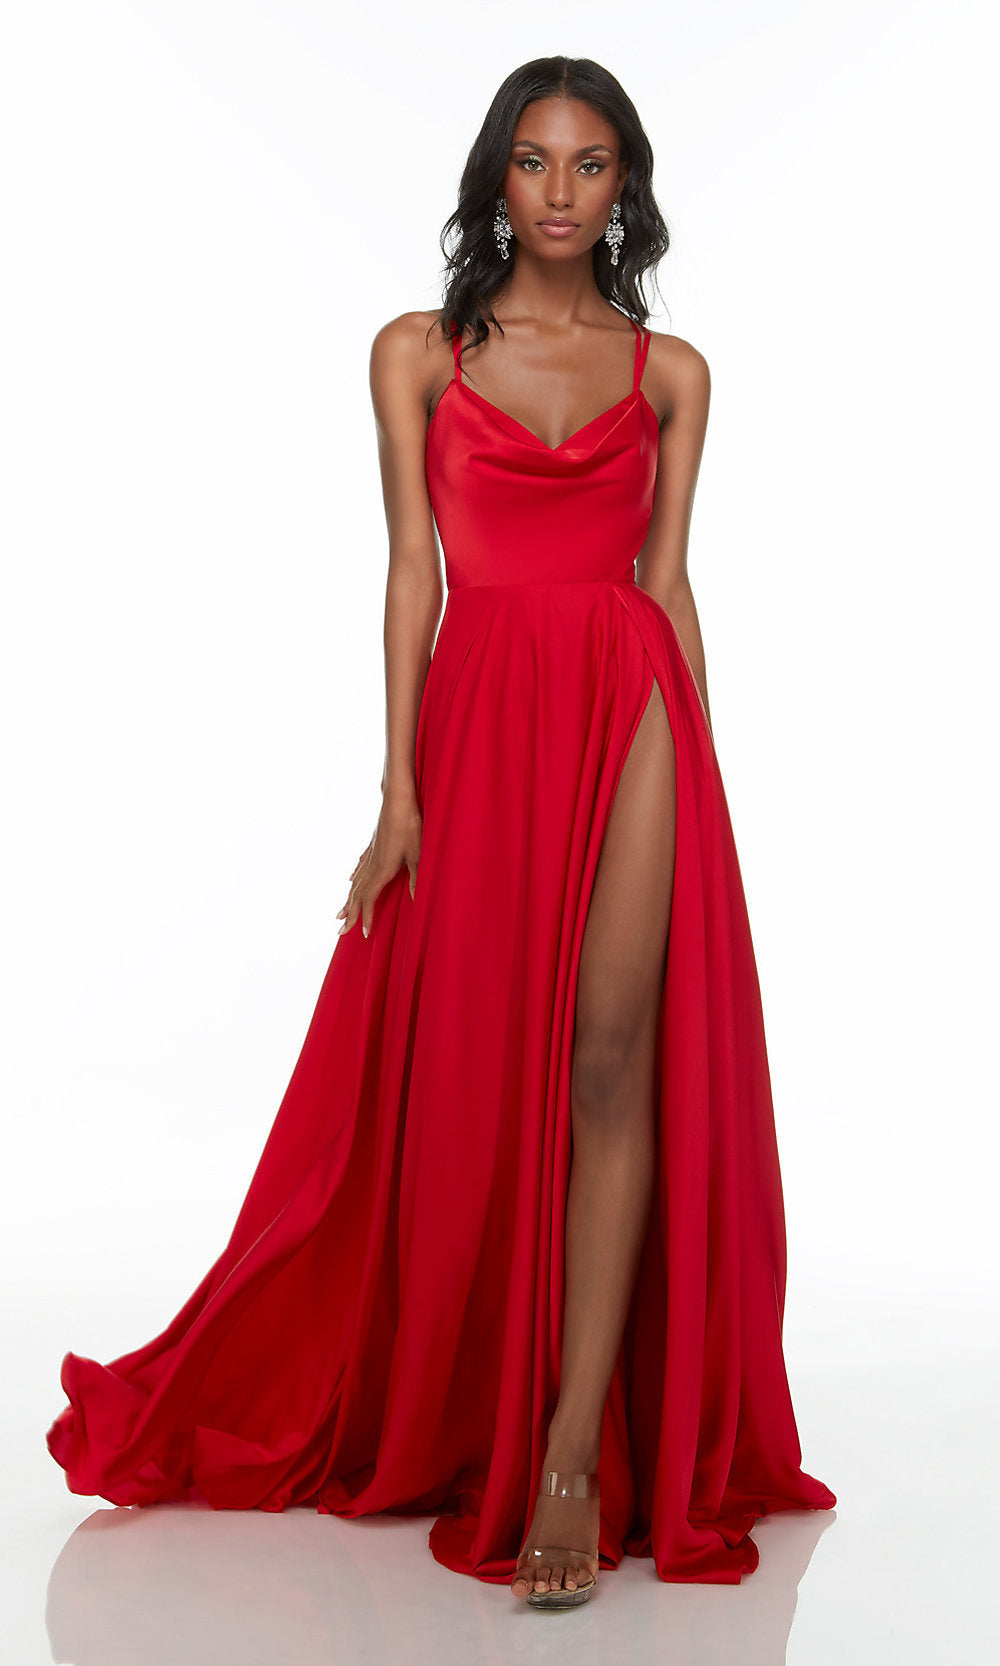 New Red Mermaid Red Carpet Evening Gowns With Spaghetti Straps, Long  Sleeves, And Tulle Skirt Perfect For Prom And Special Occasions From  Longzhiwen, $248.94 | DHgate.Com